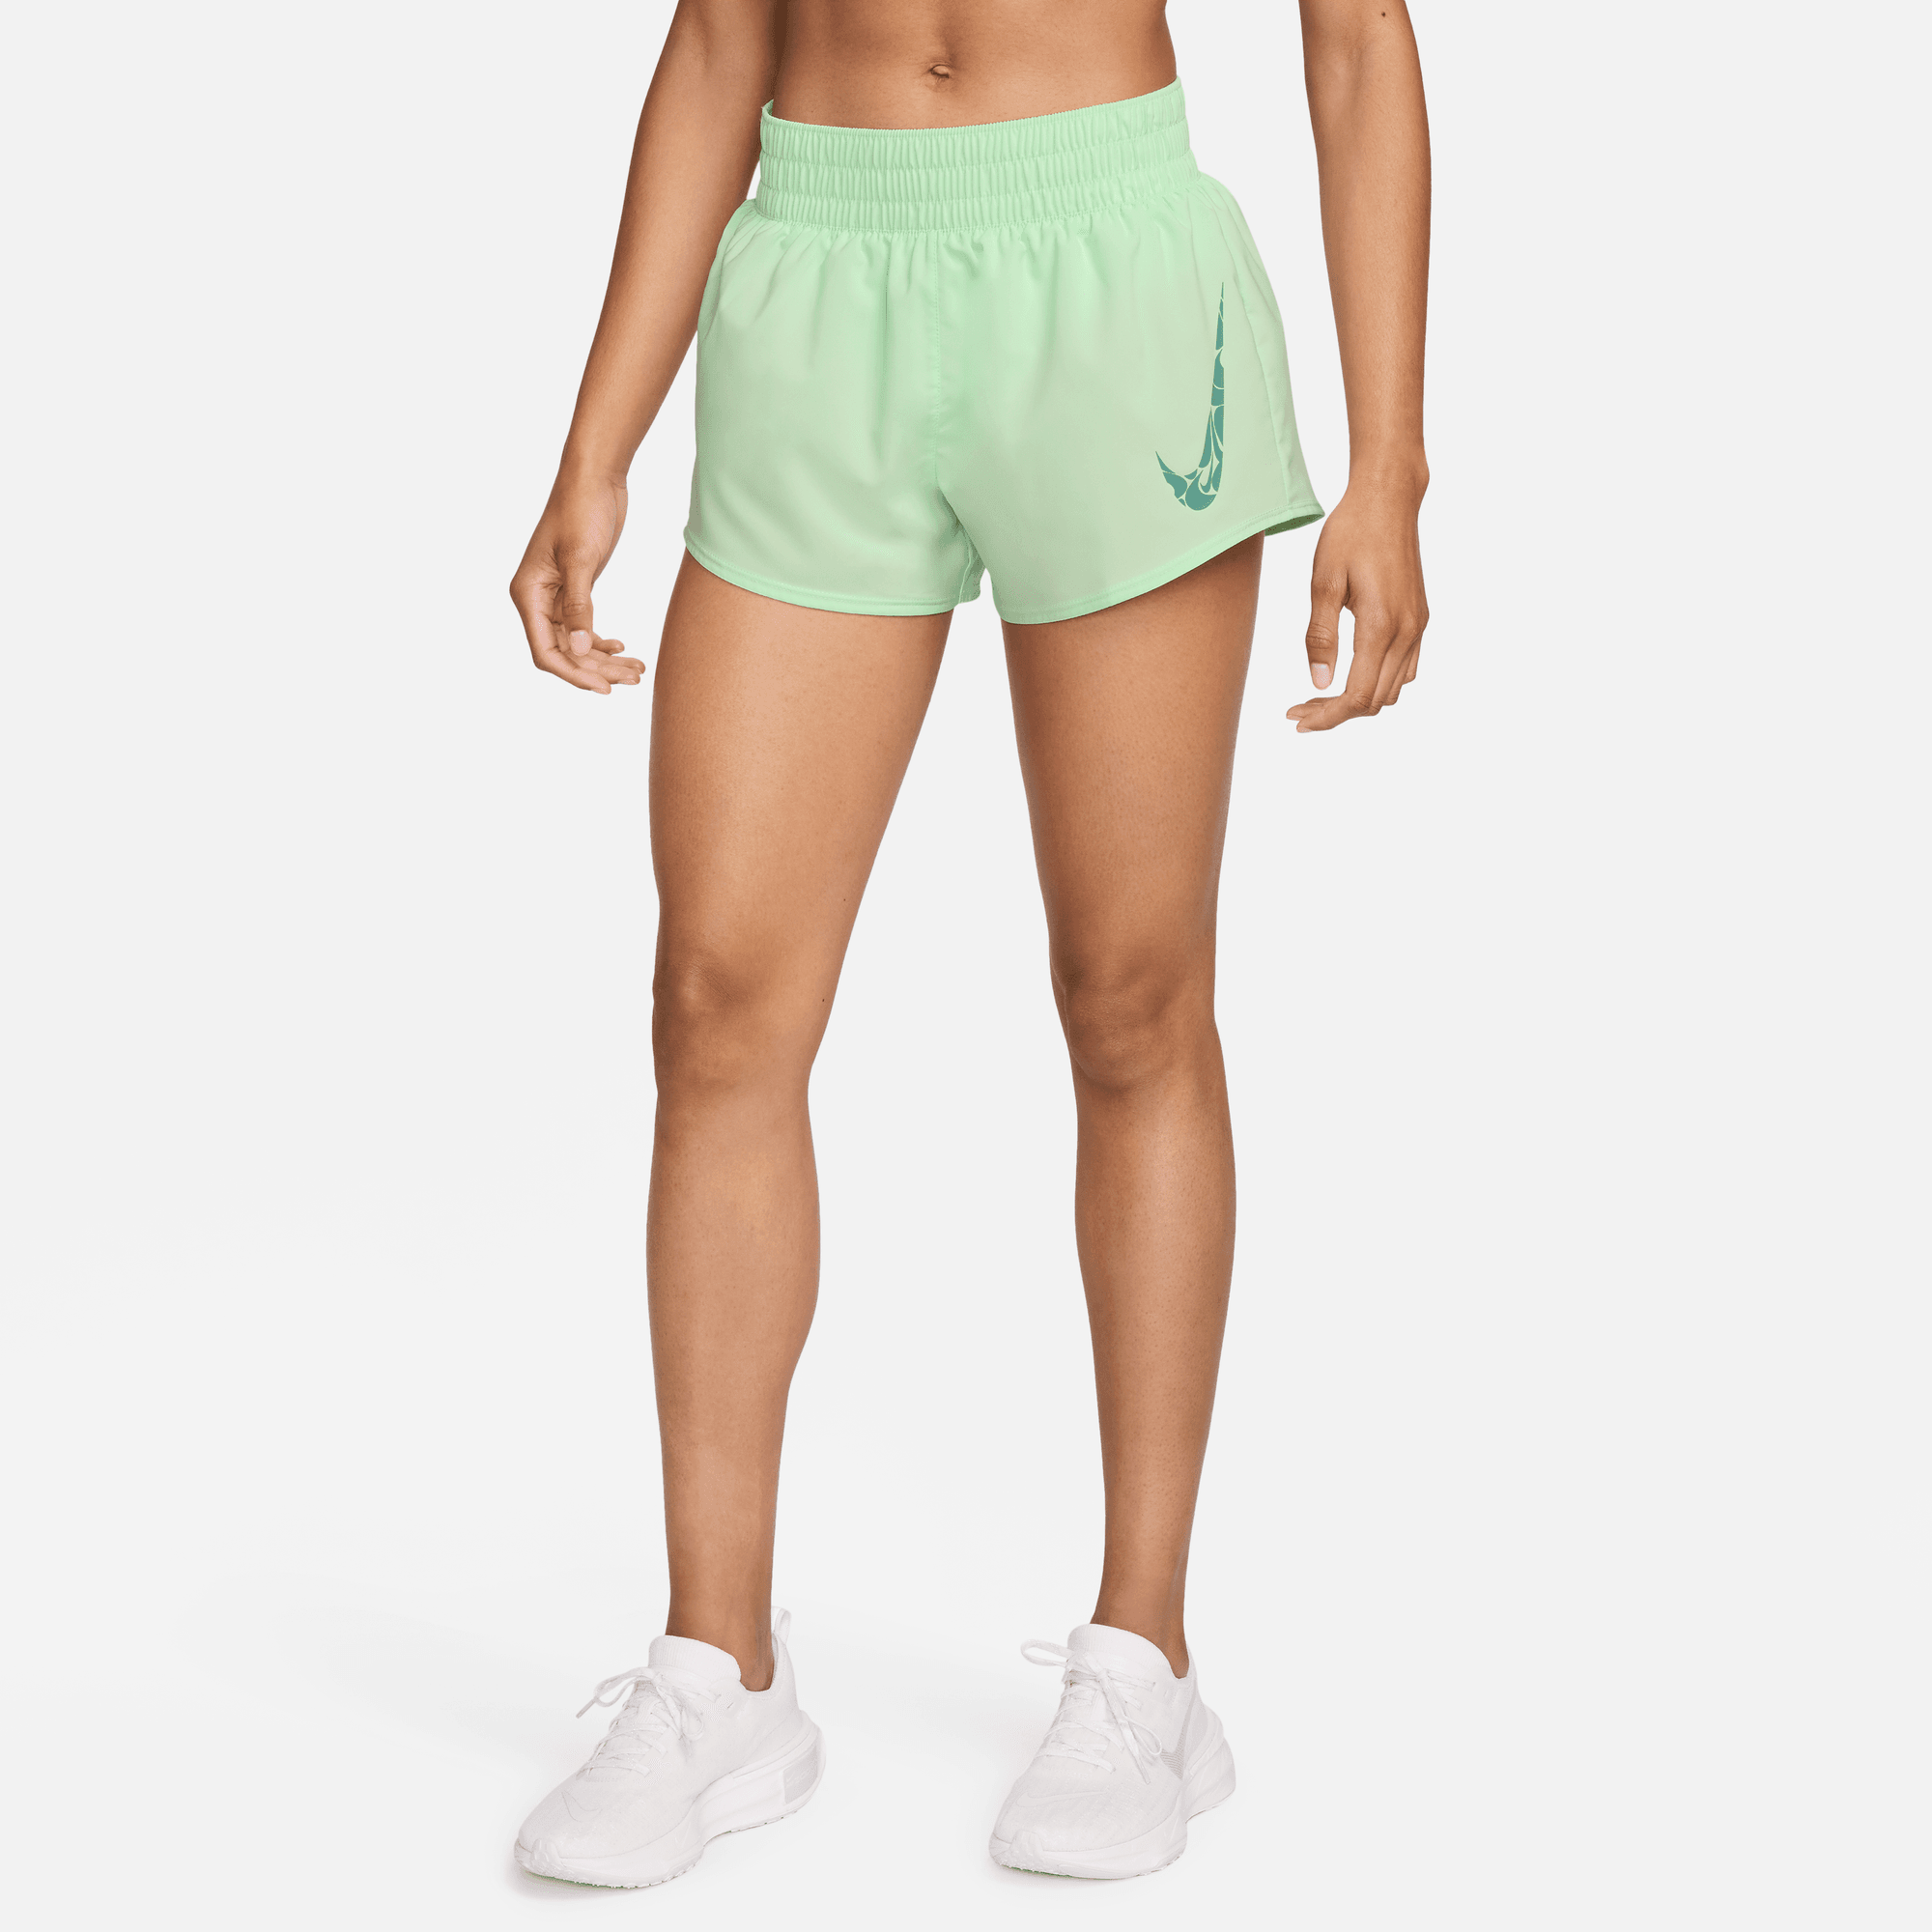 NIKE ONE  WOMEN'S DRI-FIT MID-RISE 3" BRIEF-LINED SHORTS